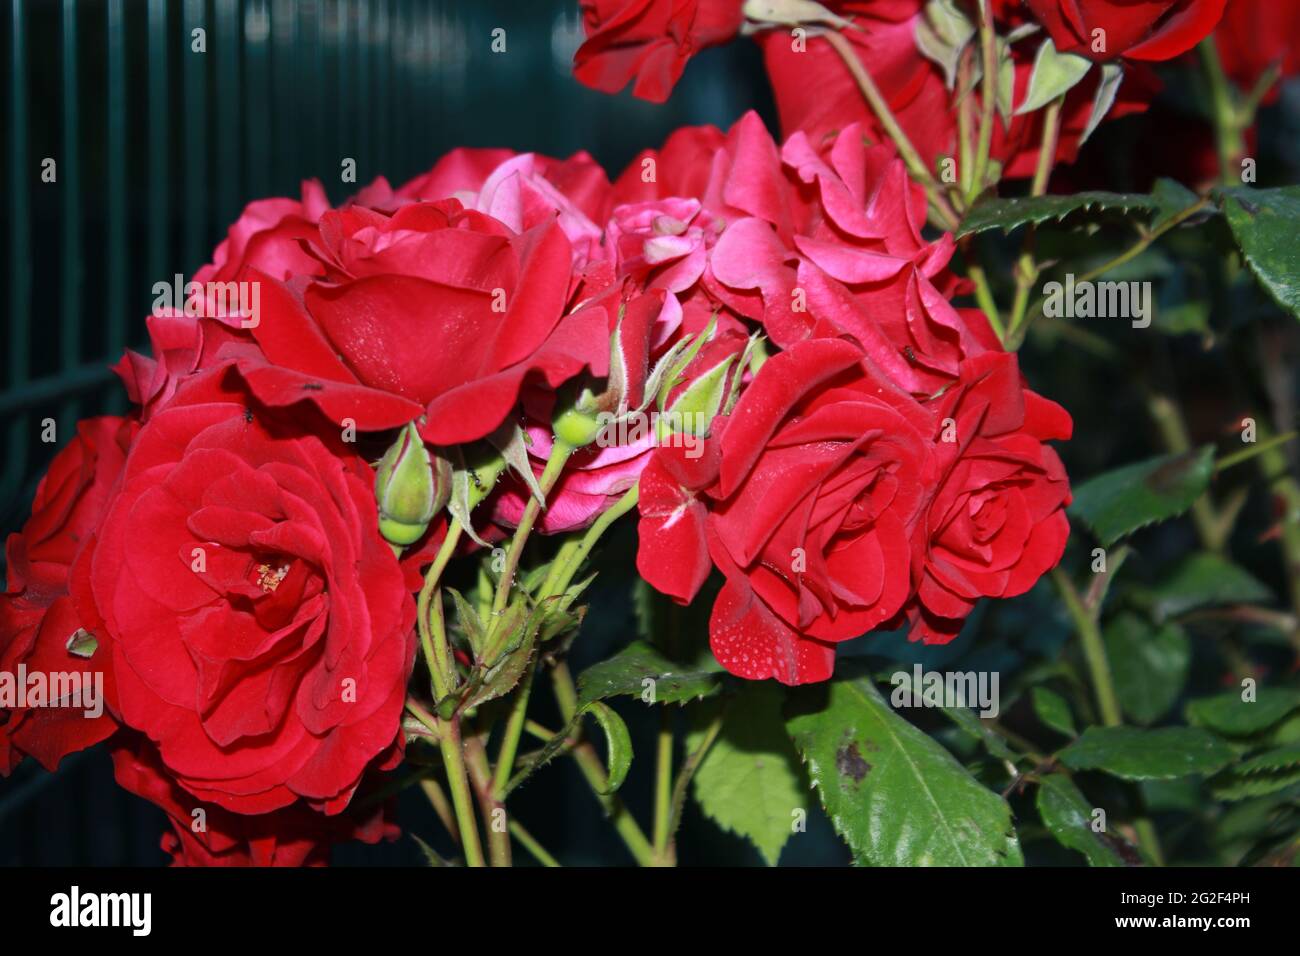 Natural Red rose flower blooming on a background of blurry red roses in ...